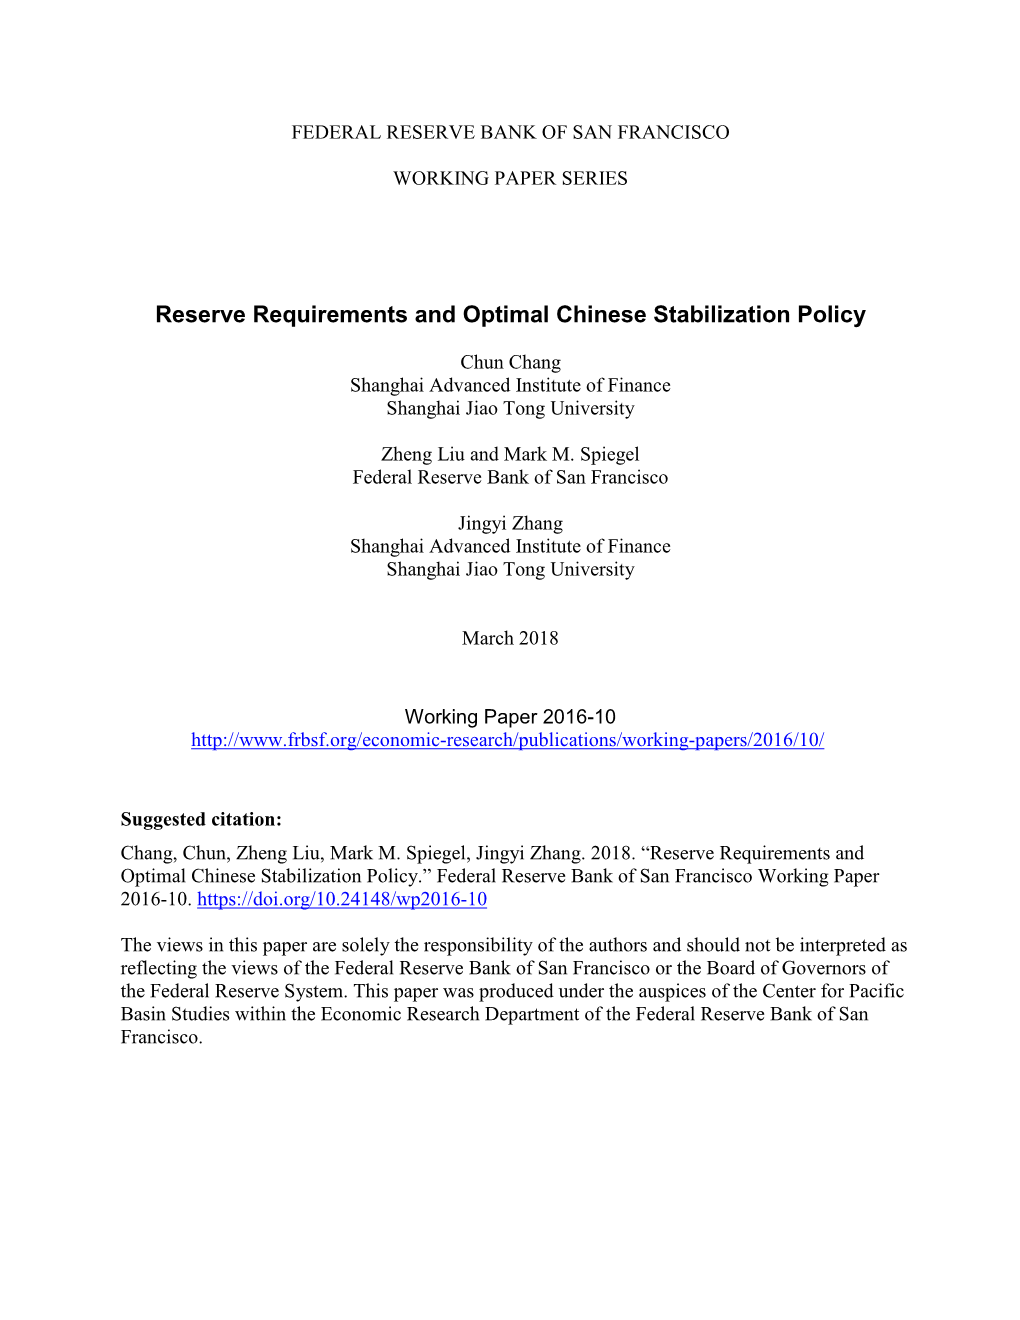 Reserve Requirements and Optimal Chinese Stabilization Policy